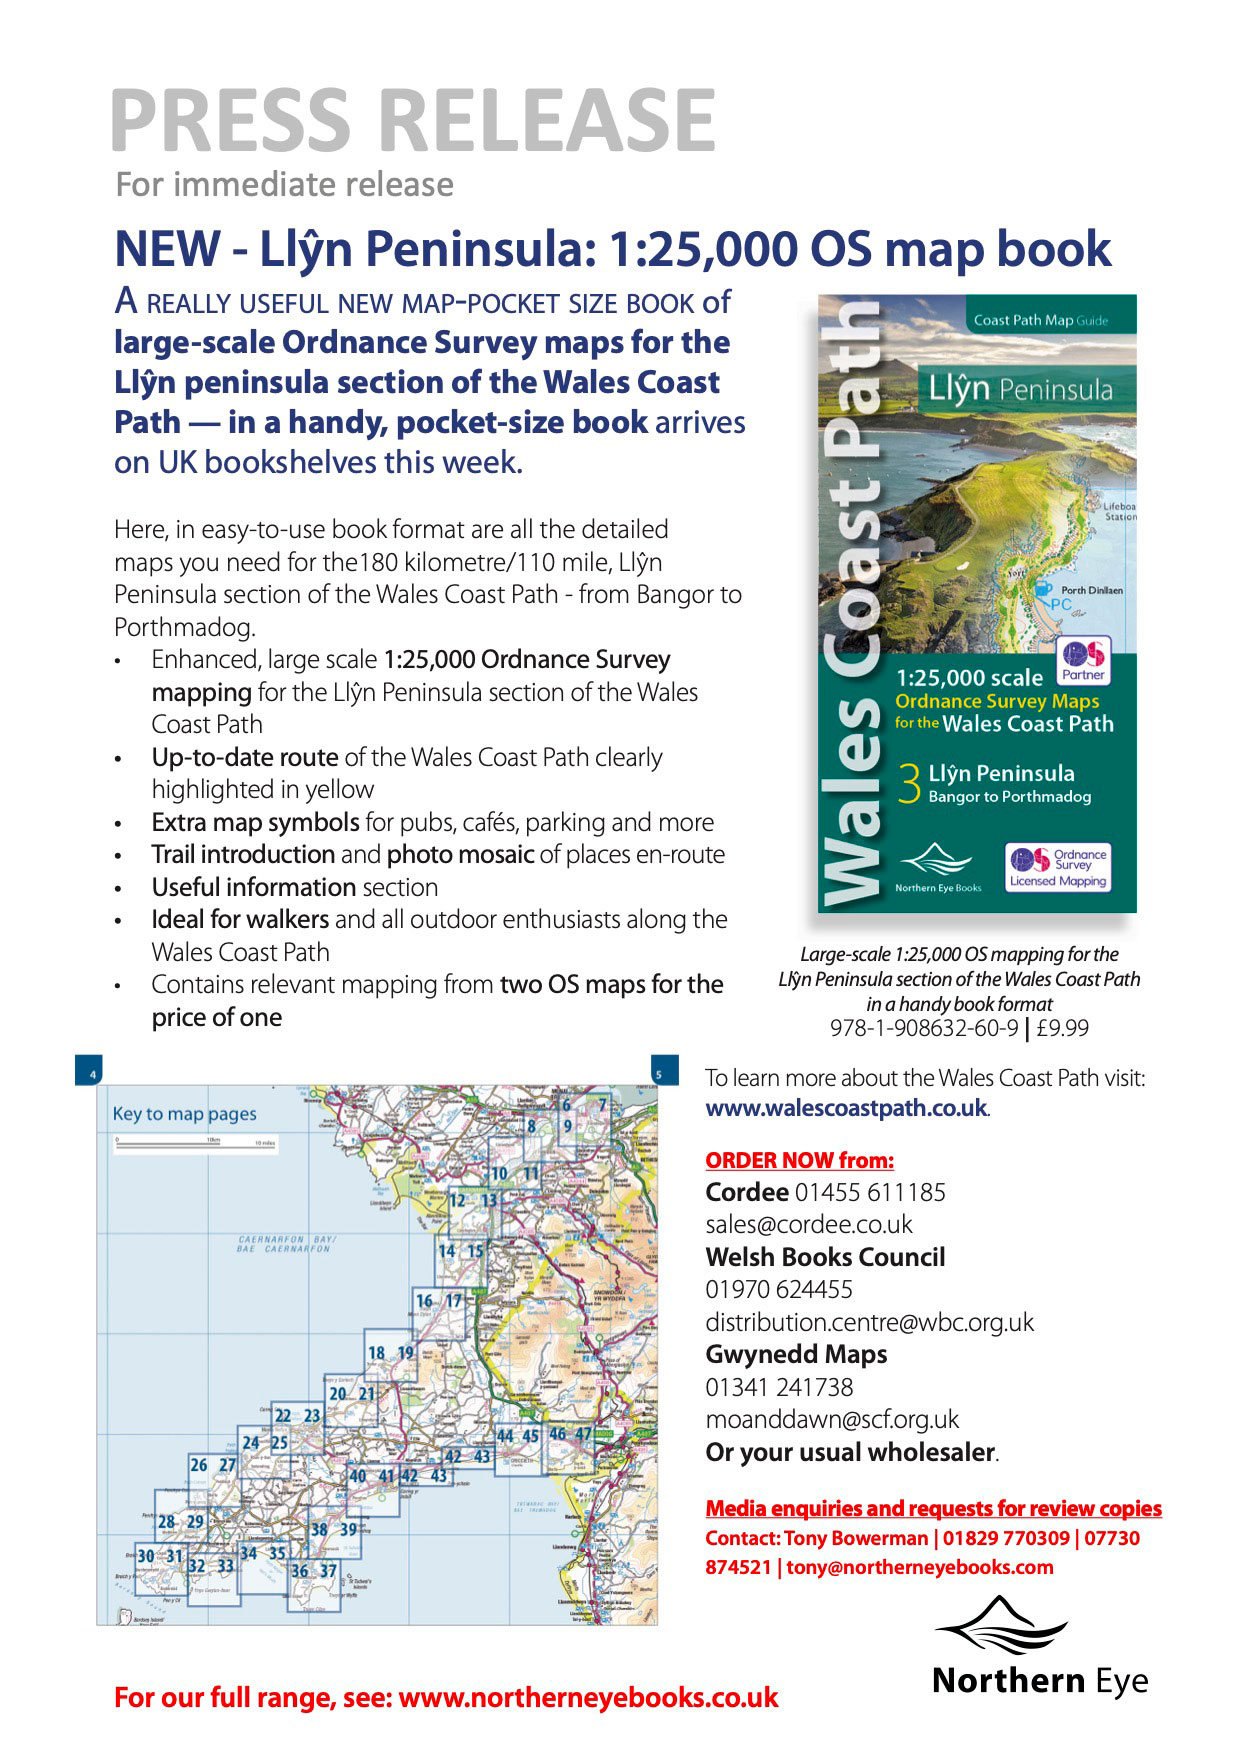 Large scale Ordnance Survey 1:25,000 map book for the Llyn Peninsula section of the Wales Coast Path.